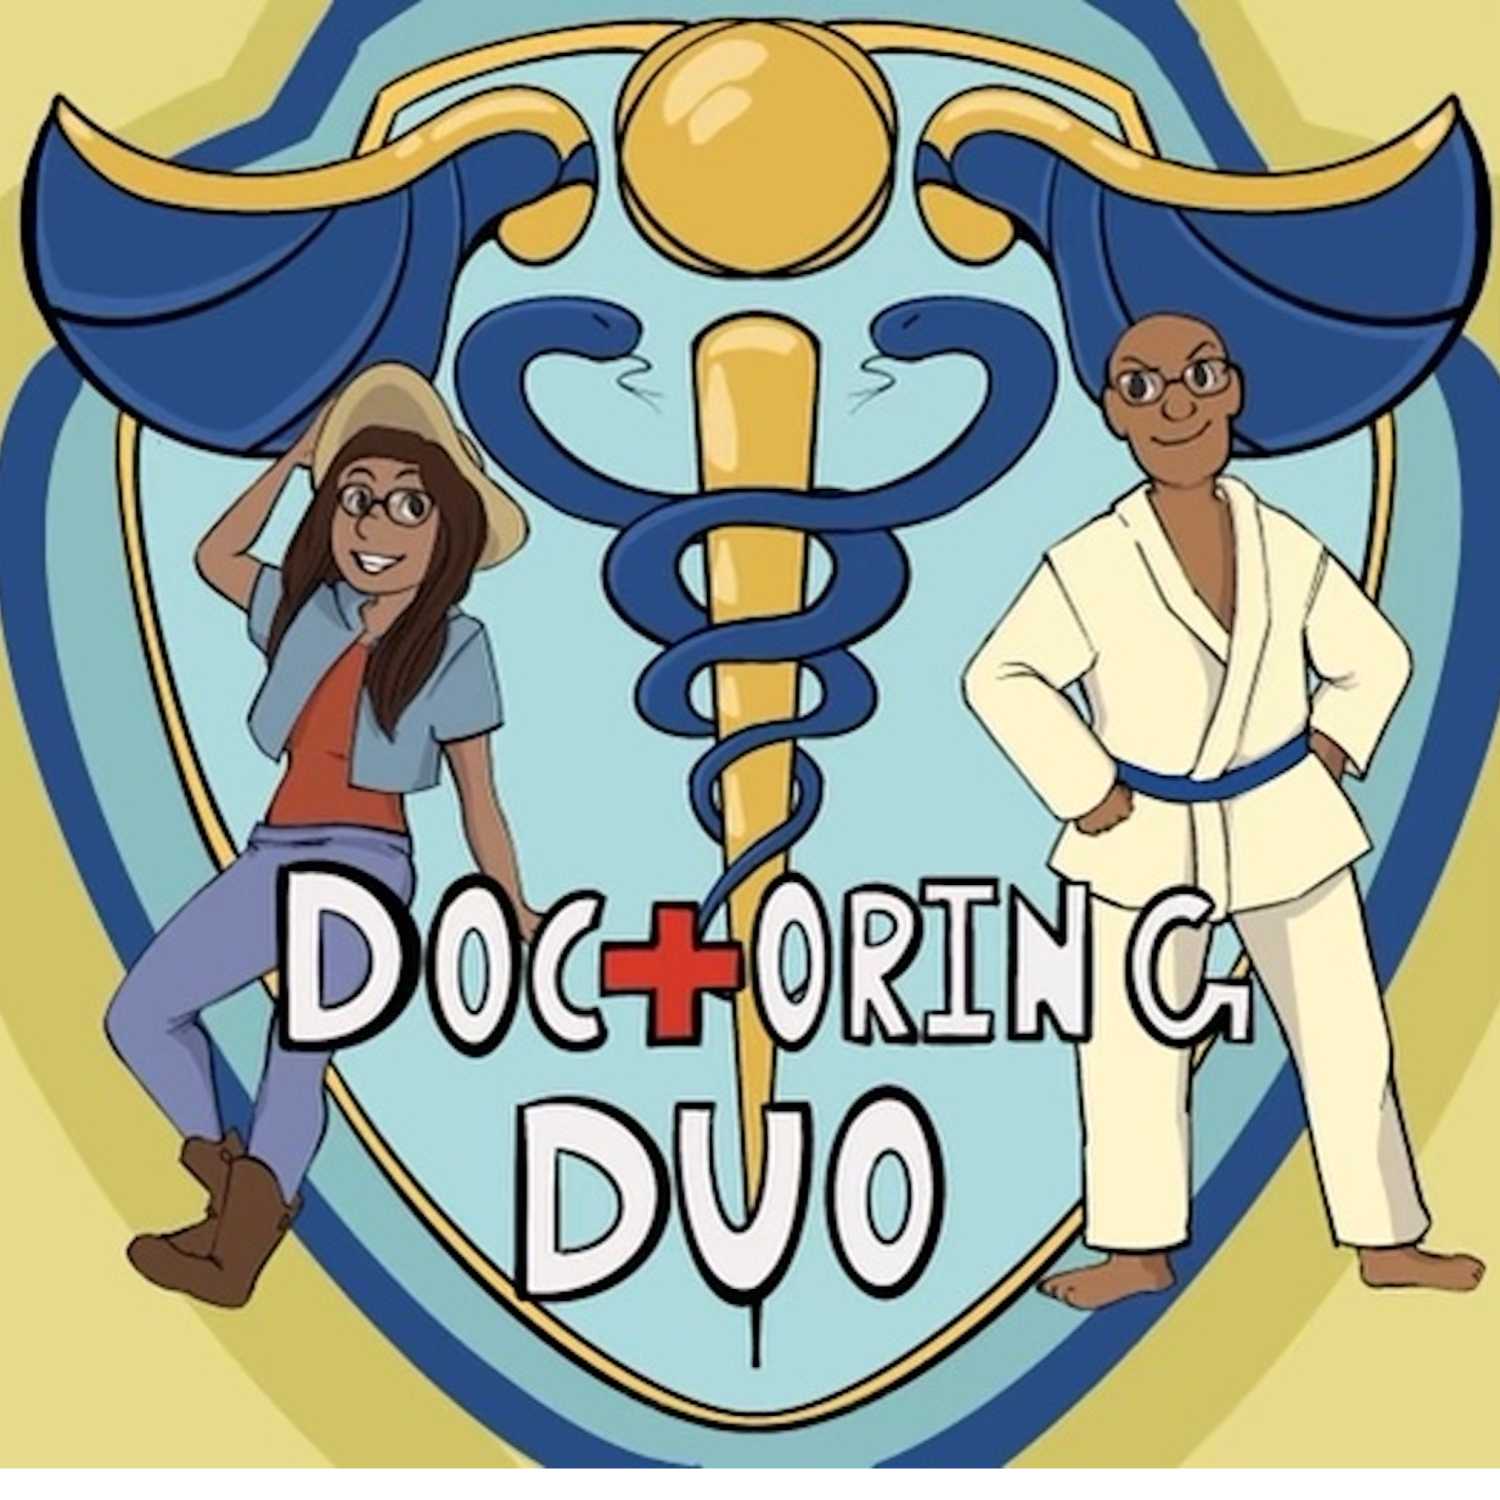 How SCARY are preclinicals? (The Doctoring Duo Halloween Special)